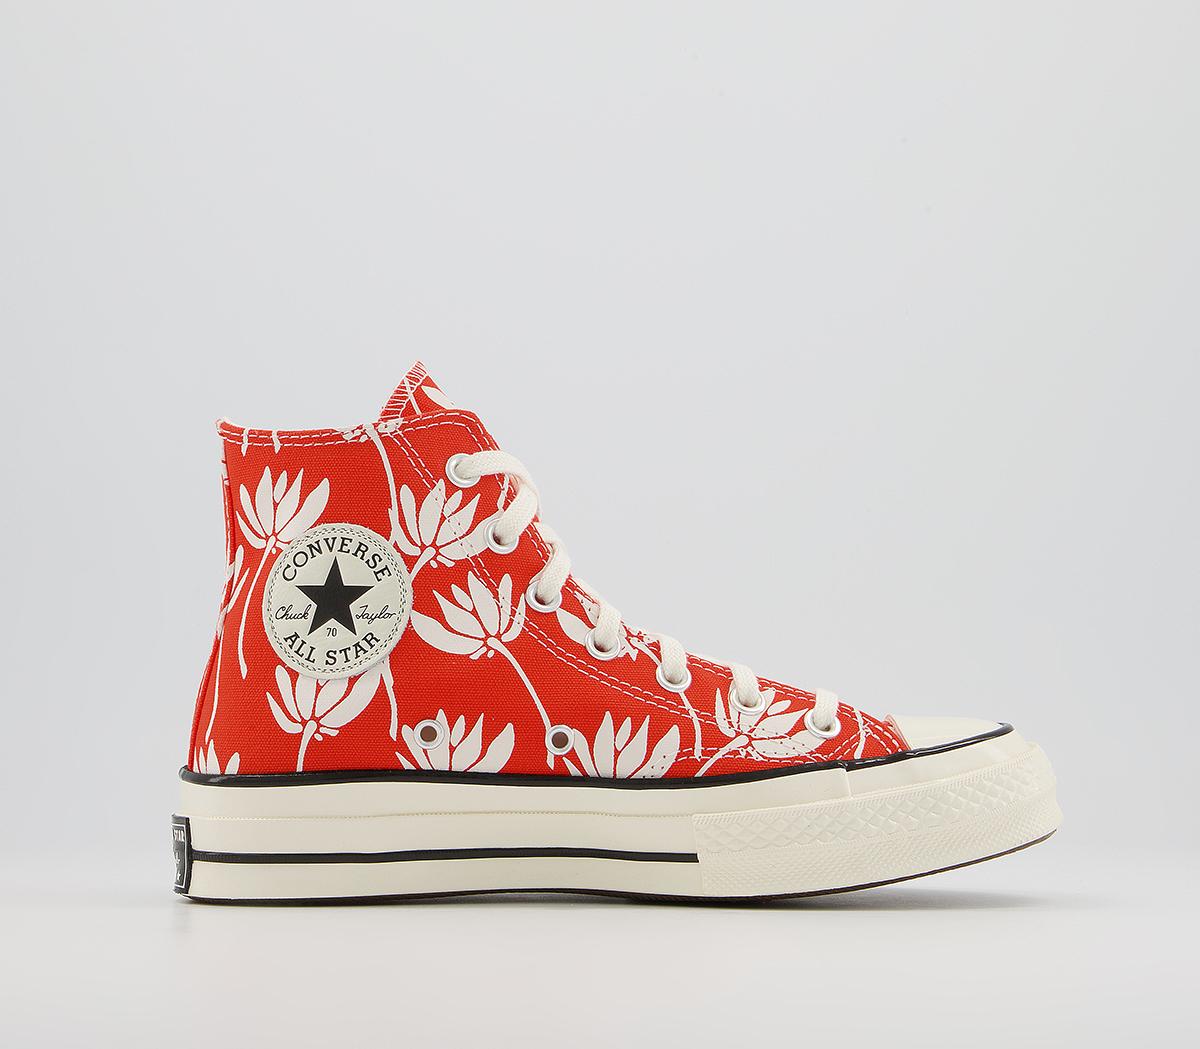 ConverseAll Star Hi 70s TrainersRed Floral Print